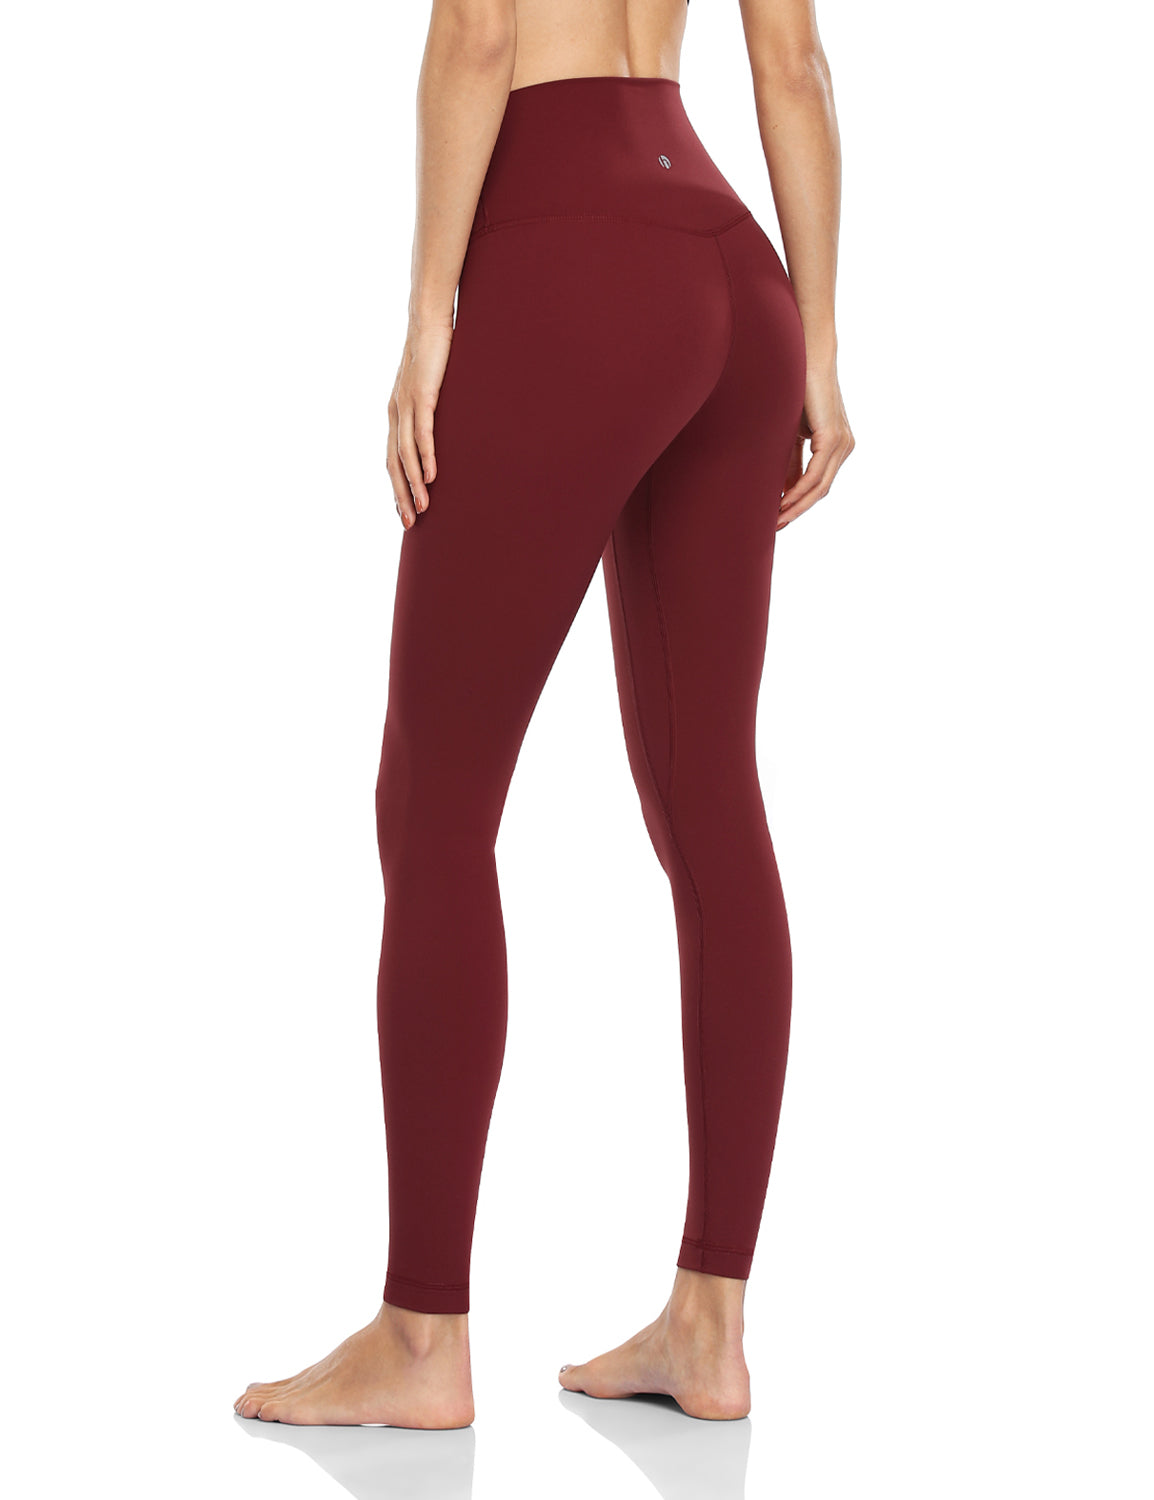 HeyNuts Formerly Hawthorn Athletic Essential II Women's Full Length Yoga  Leggings, High Waisted Workout Pants 28